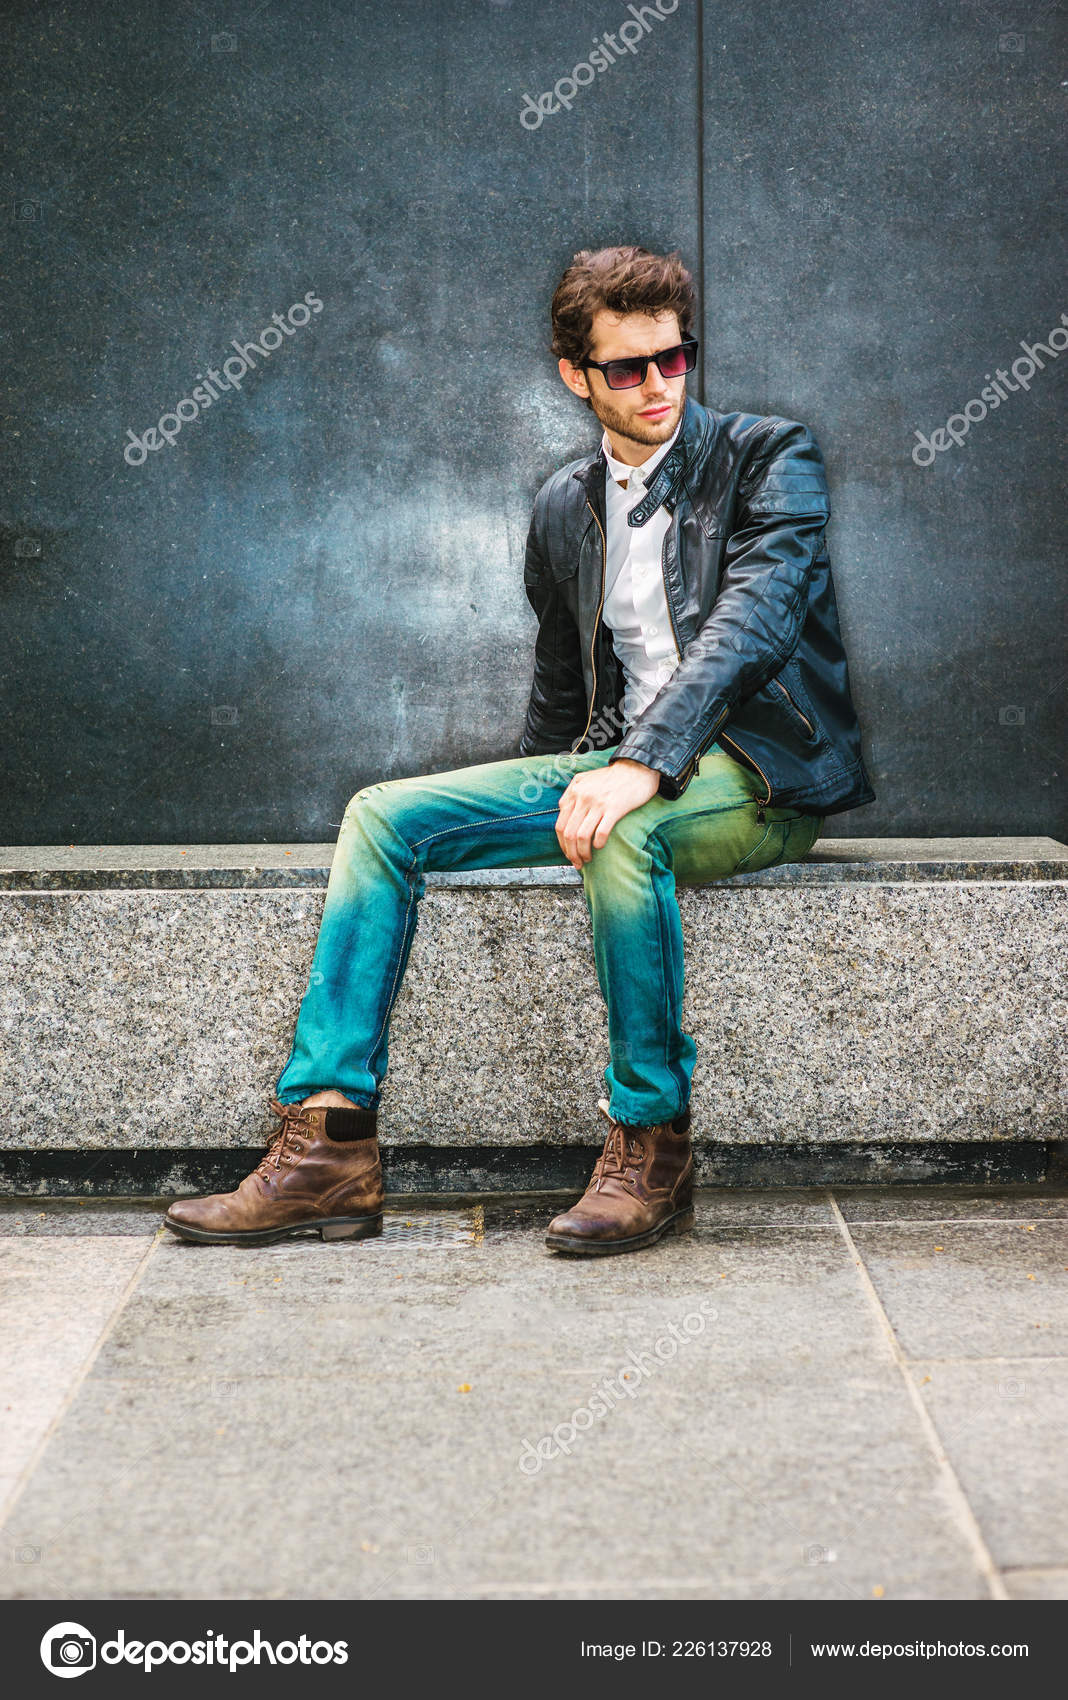 Photo by Black Jeans Dressing Boot 226137928 Blue Wearing Stock Leather Brown ©xcai Shoes Jacket